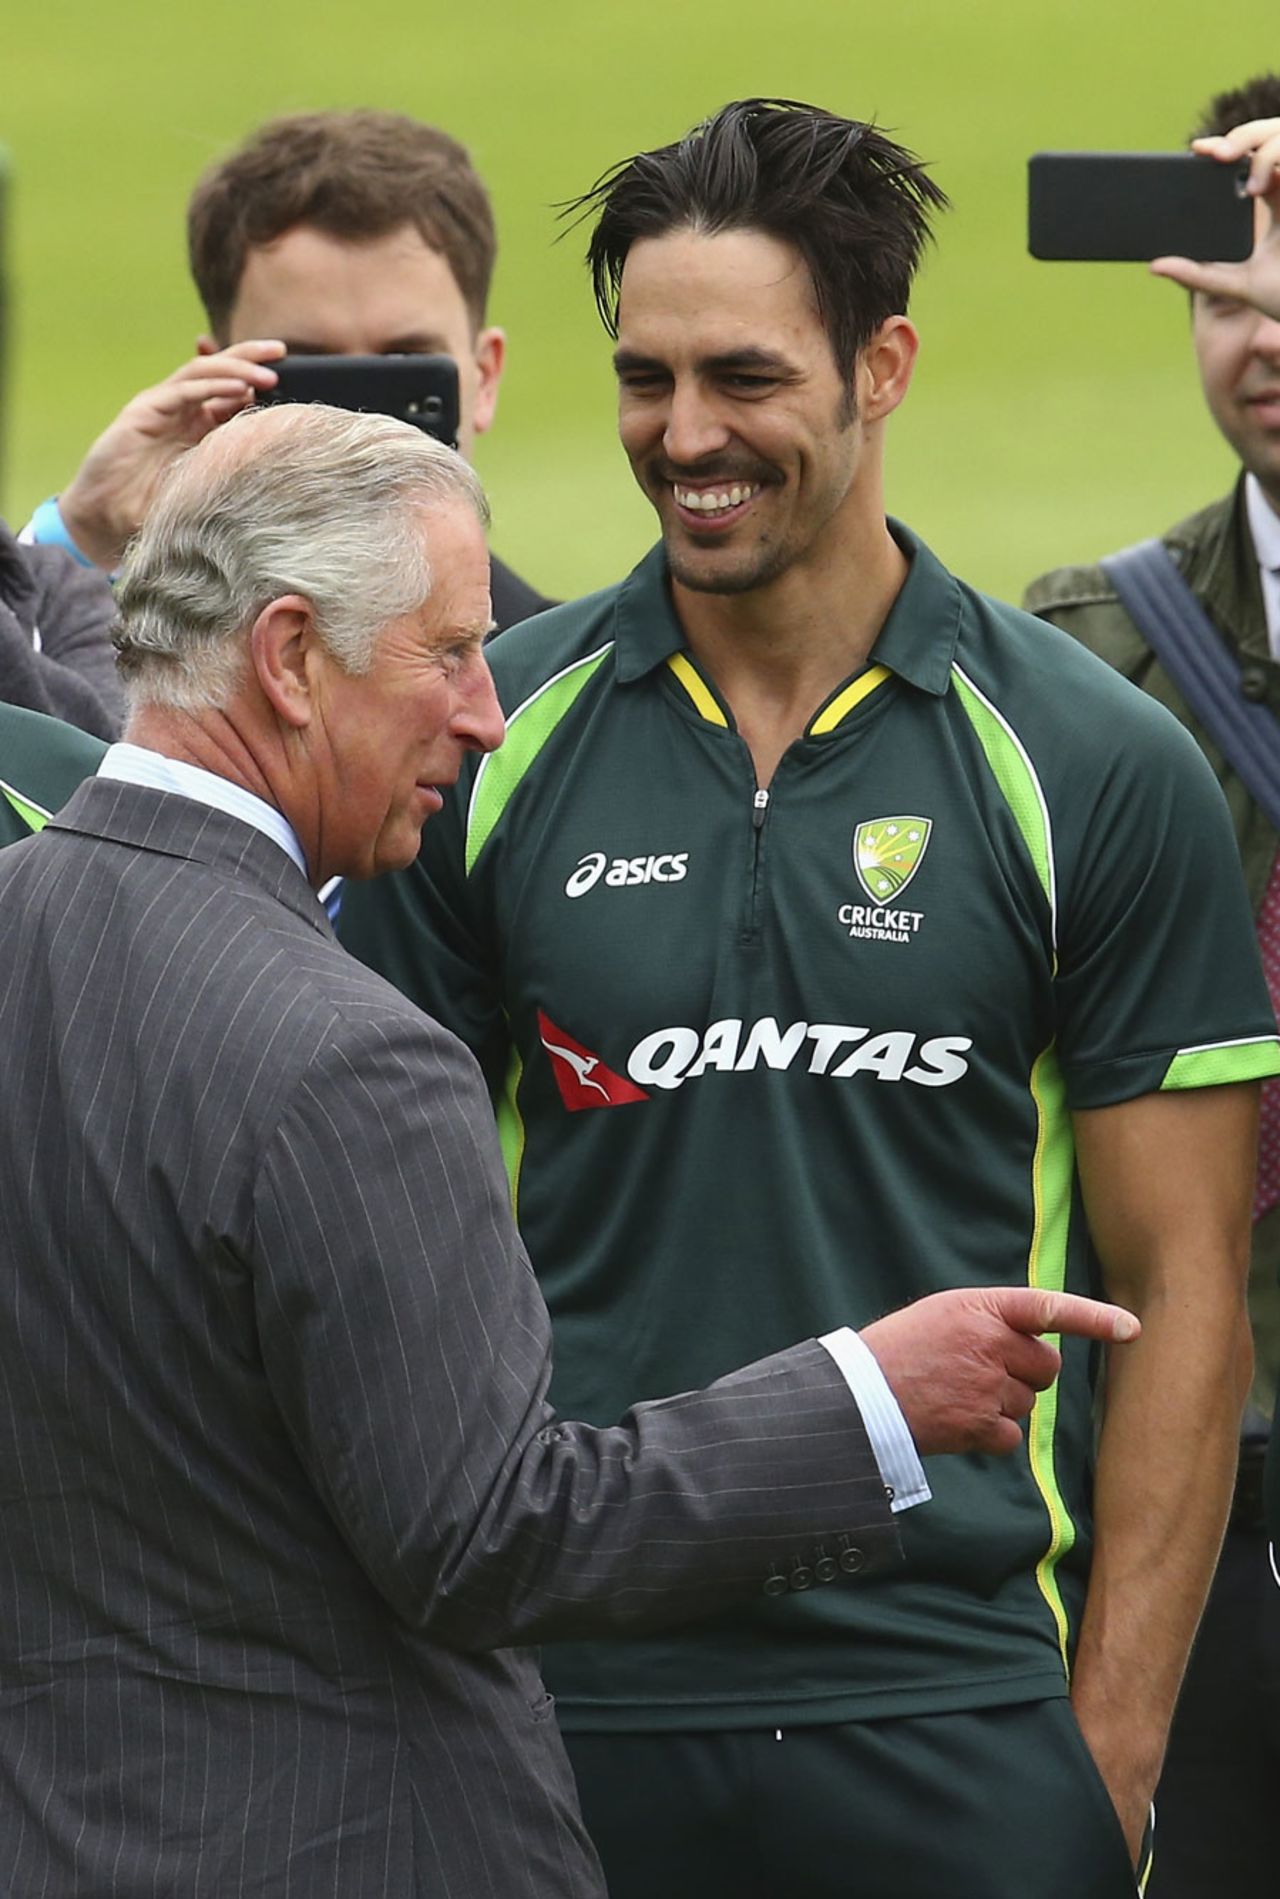 Bowl to the right - the Prince of Wales offers a word of advice to Mitchell Johnson, Cardiff, July 6, 2015